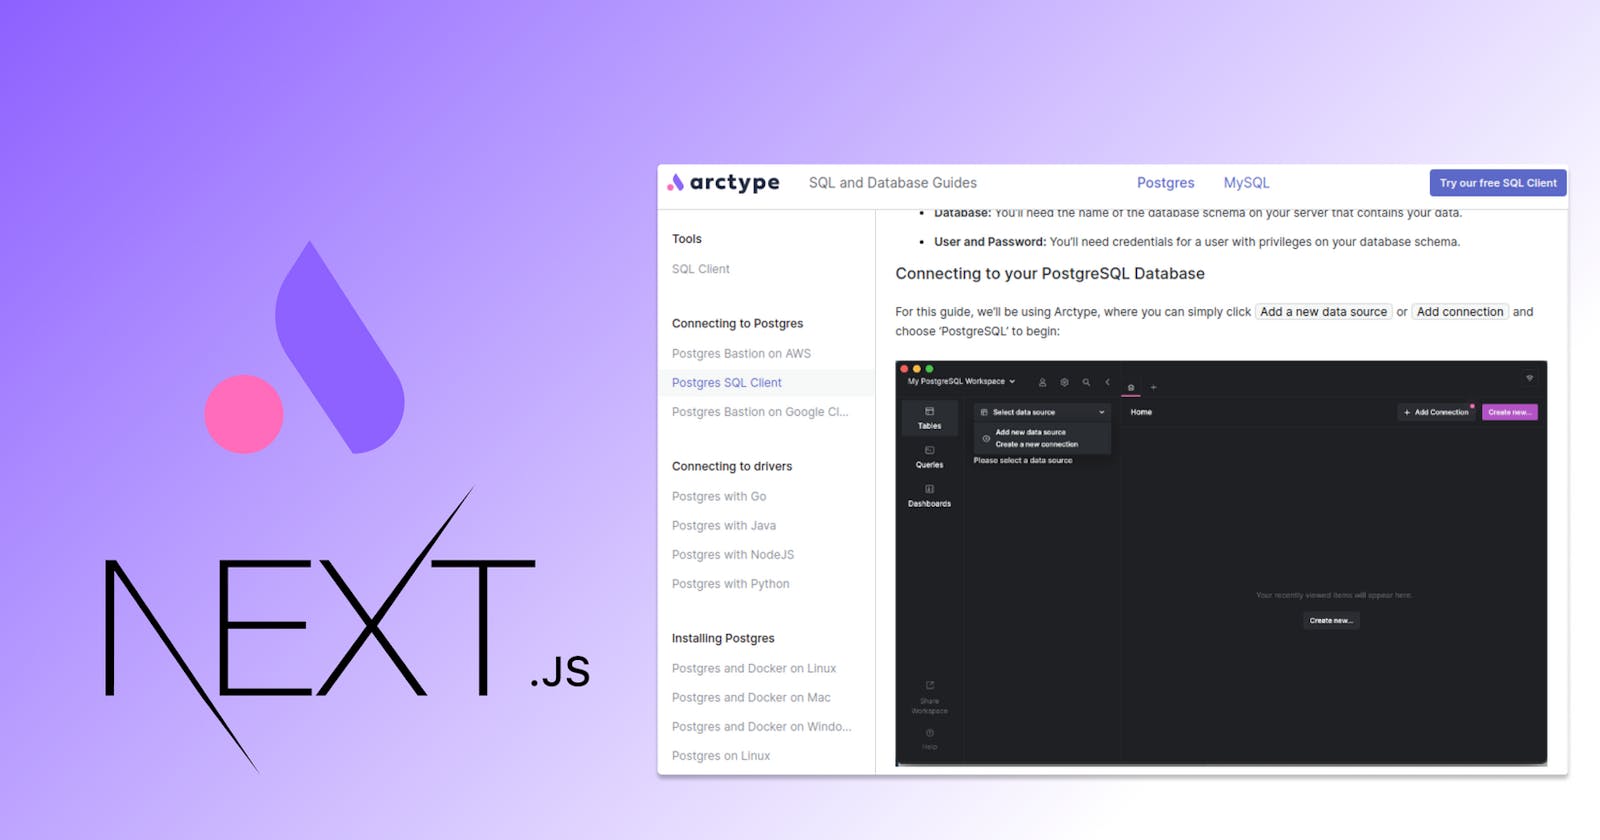 Building our Database Connection Guide using Next.js